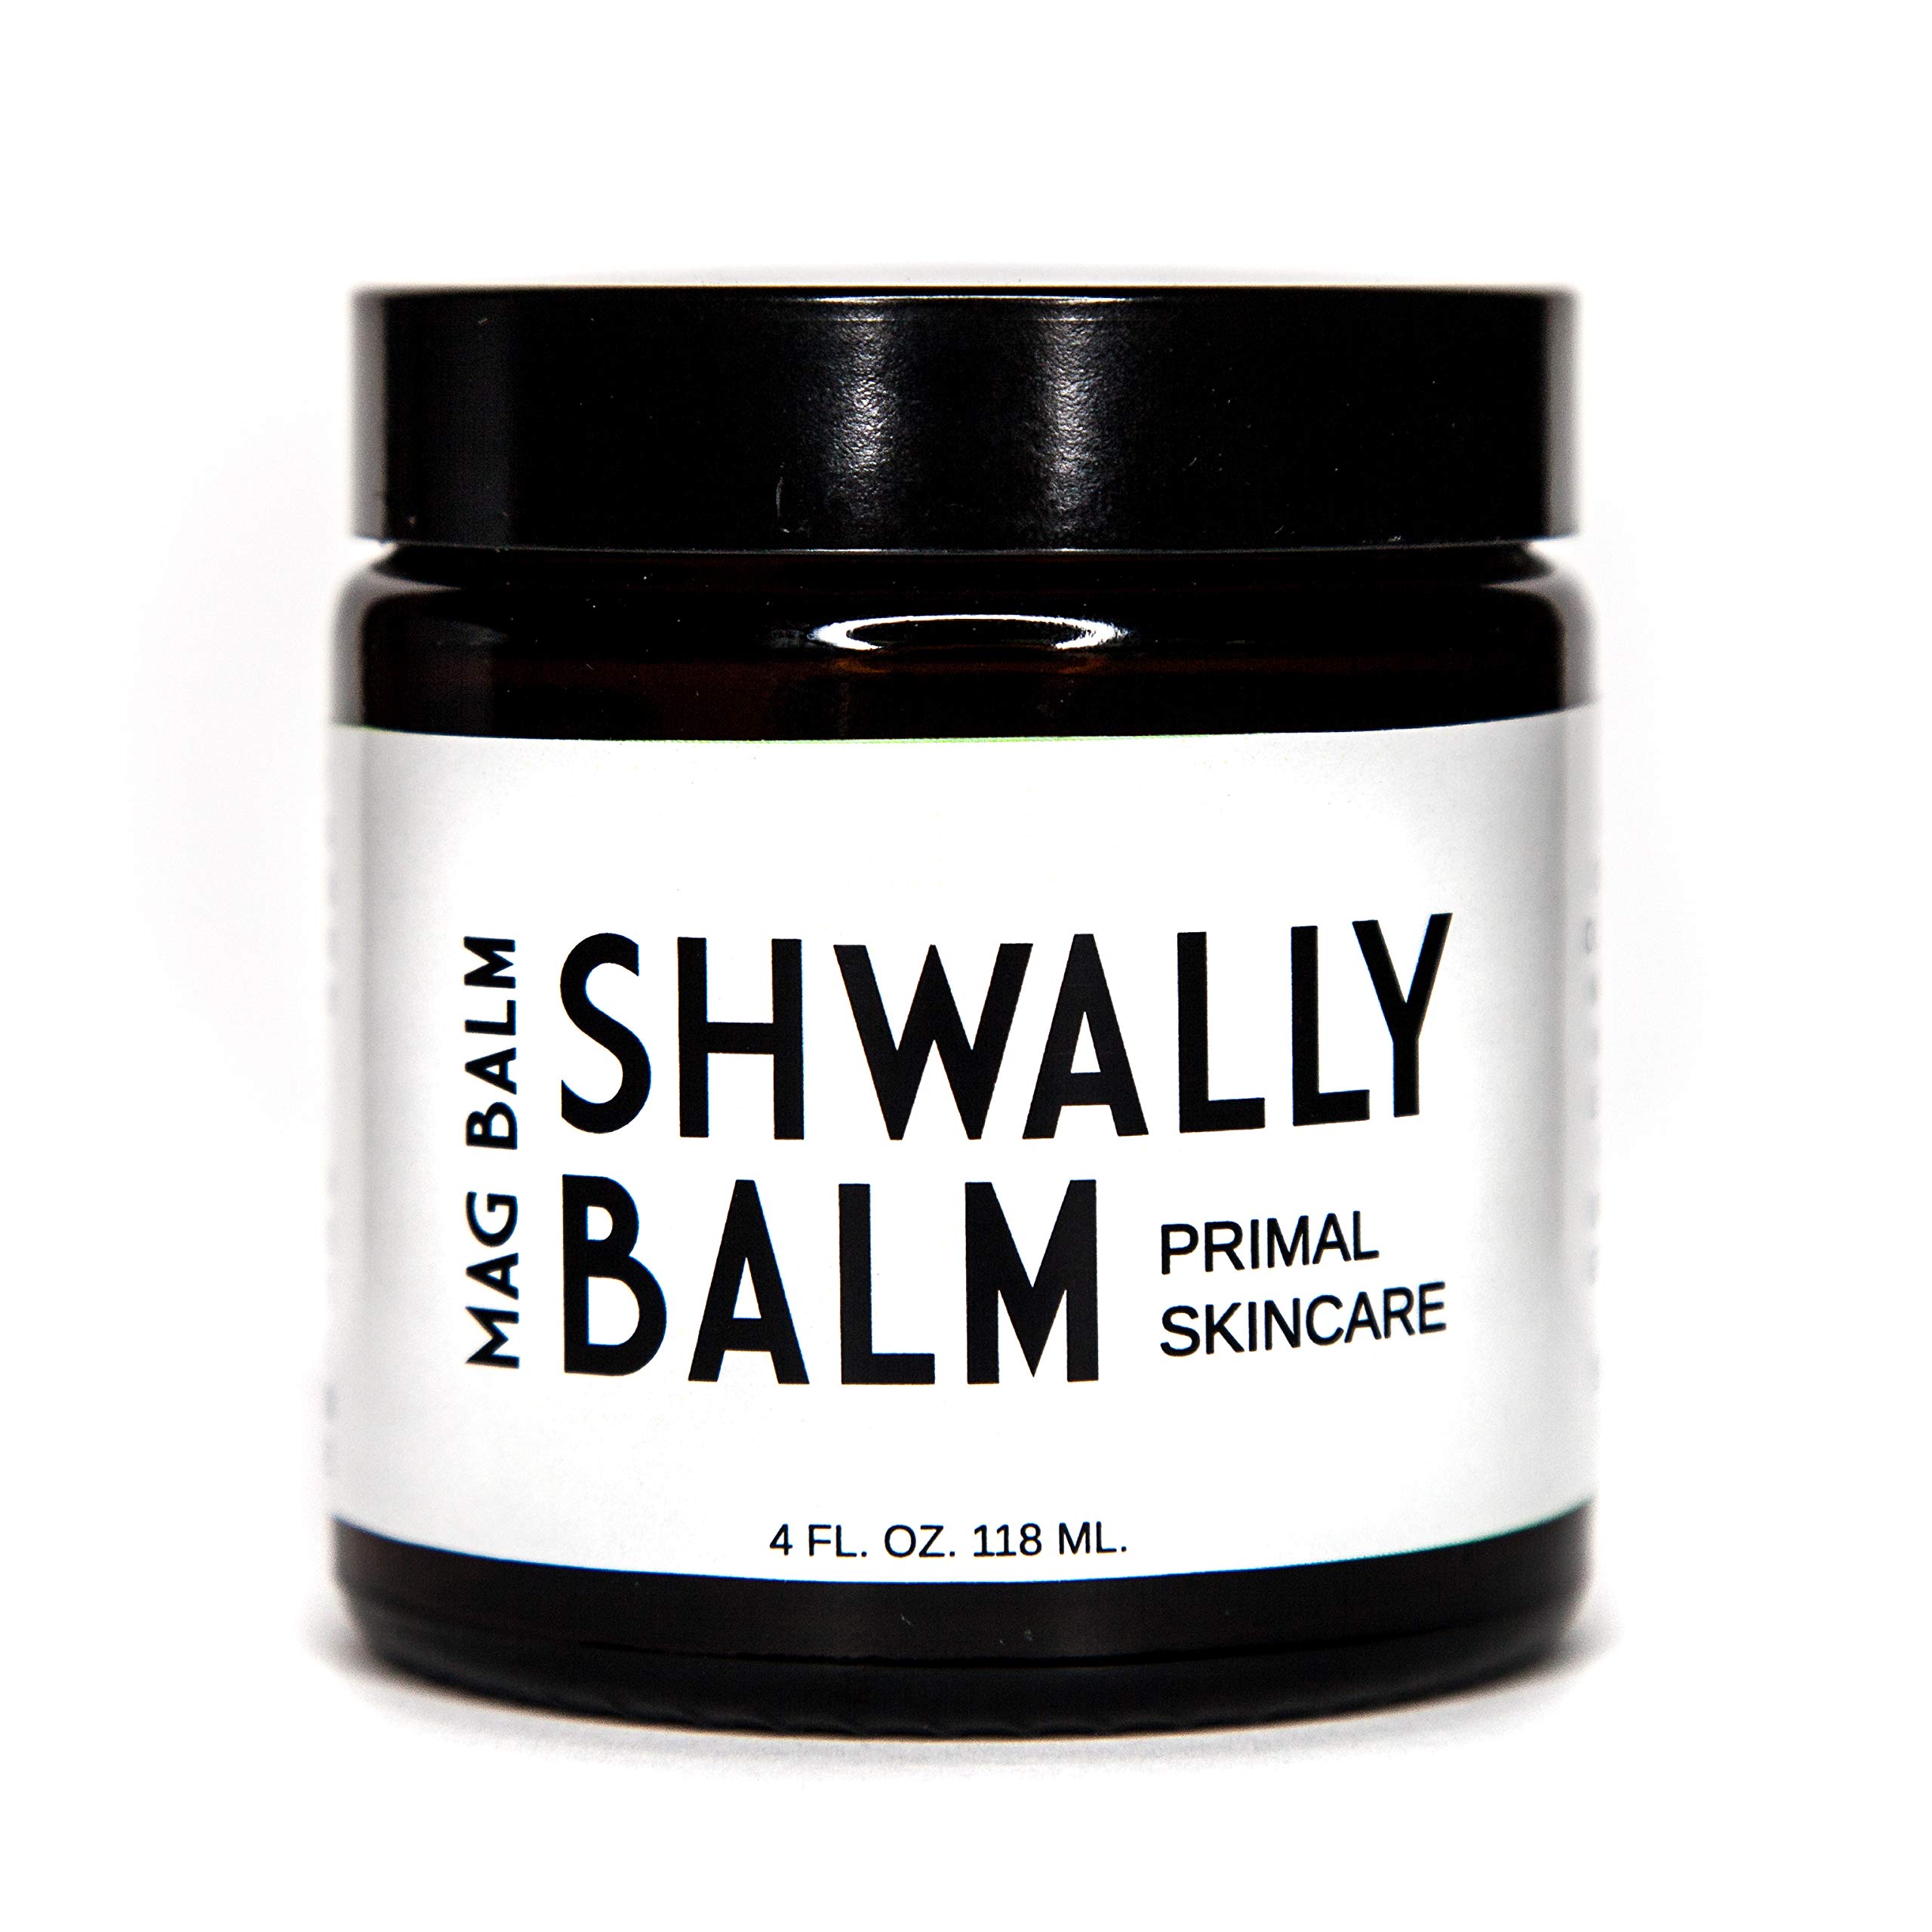 Shwally Paleo Magnesium Oil Cream - A True Seed-Oil Free & Primal Mag Balm - 100% Grass Fed Tallow, Avocado, Extra Virgin Olive Oil with Zechstein Magnesium - Subtle Vanilla Bean